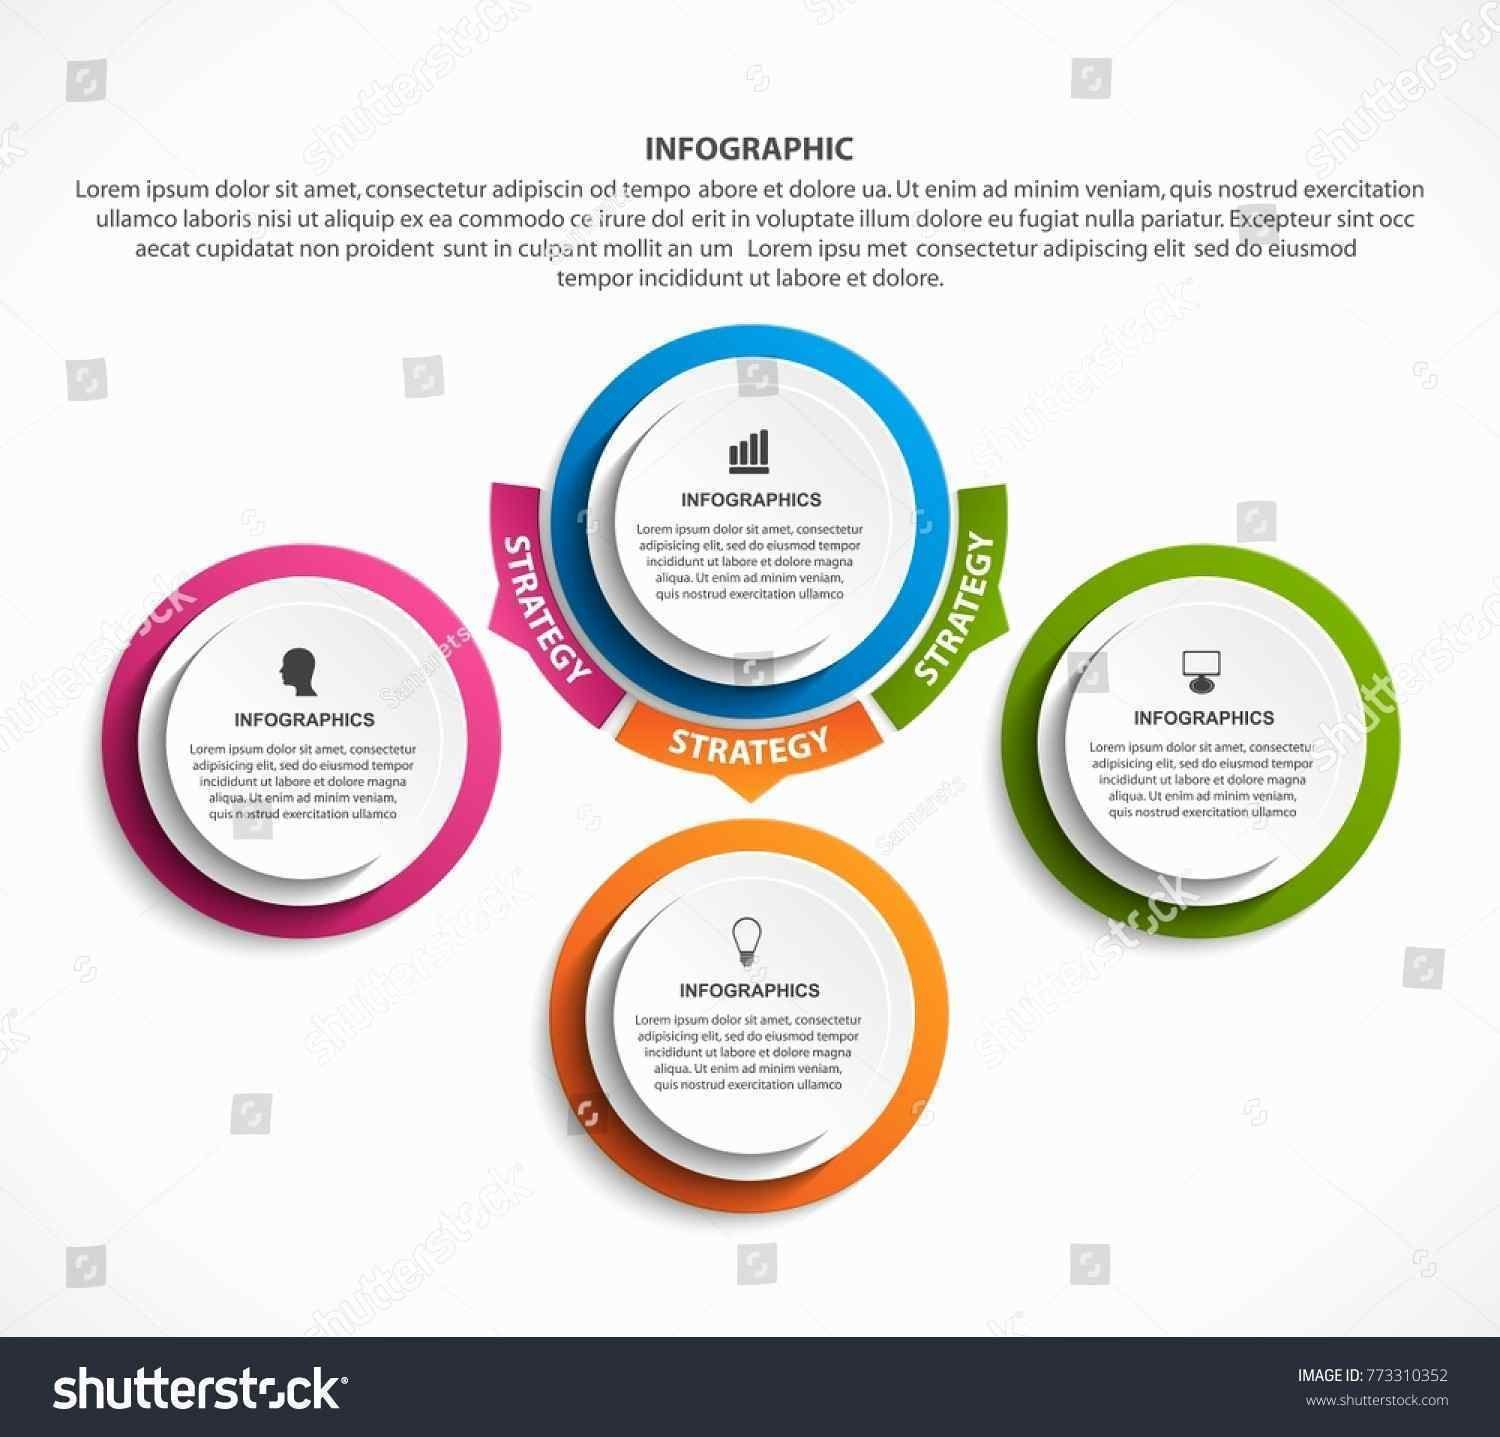 Change Infographic – Âˆš ¢Ë†å¡ Change Template Powerpoint Throughout How To Change Template In Powerpoint